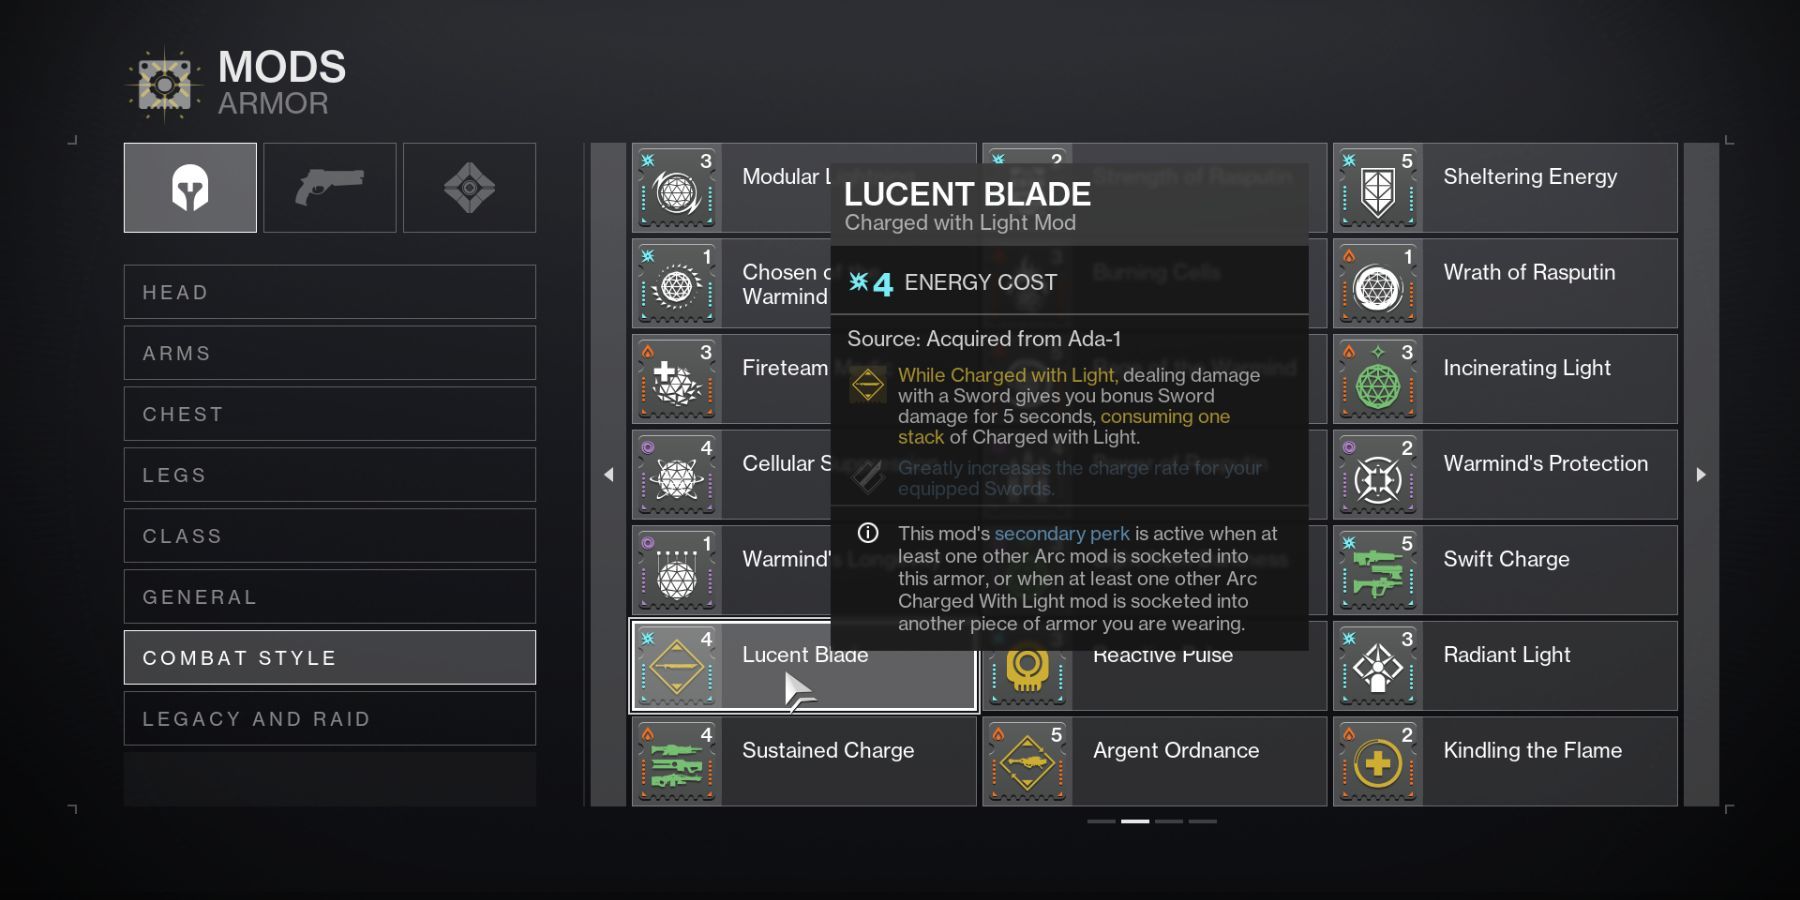 Lucent Blade Mod in Destiny 2